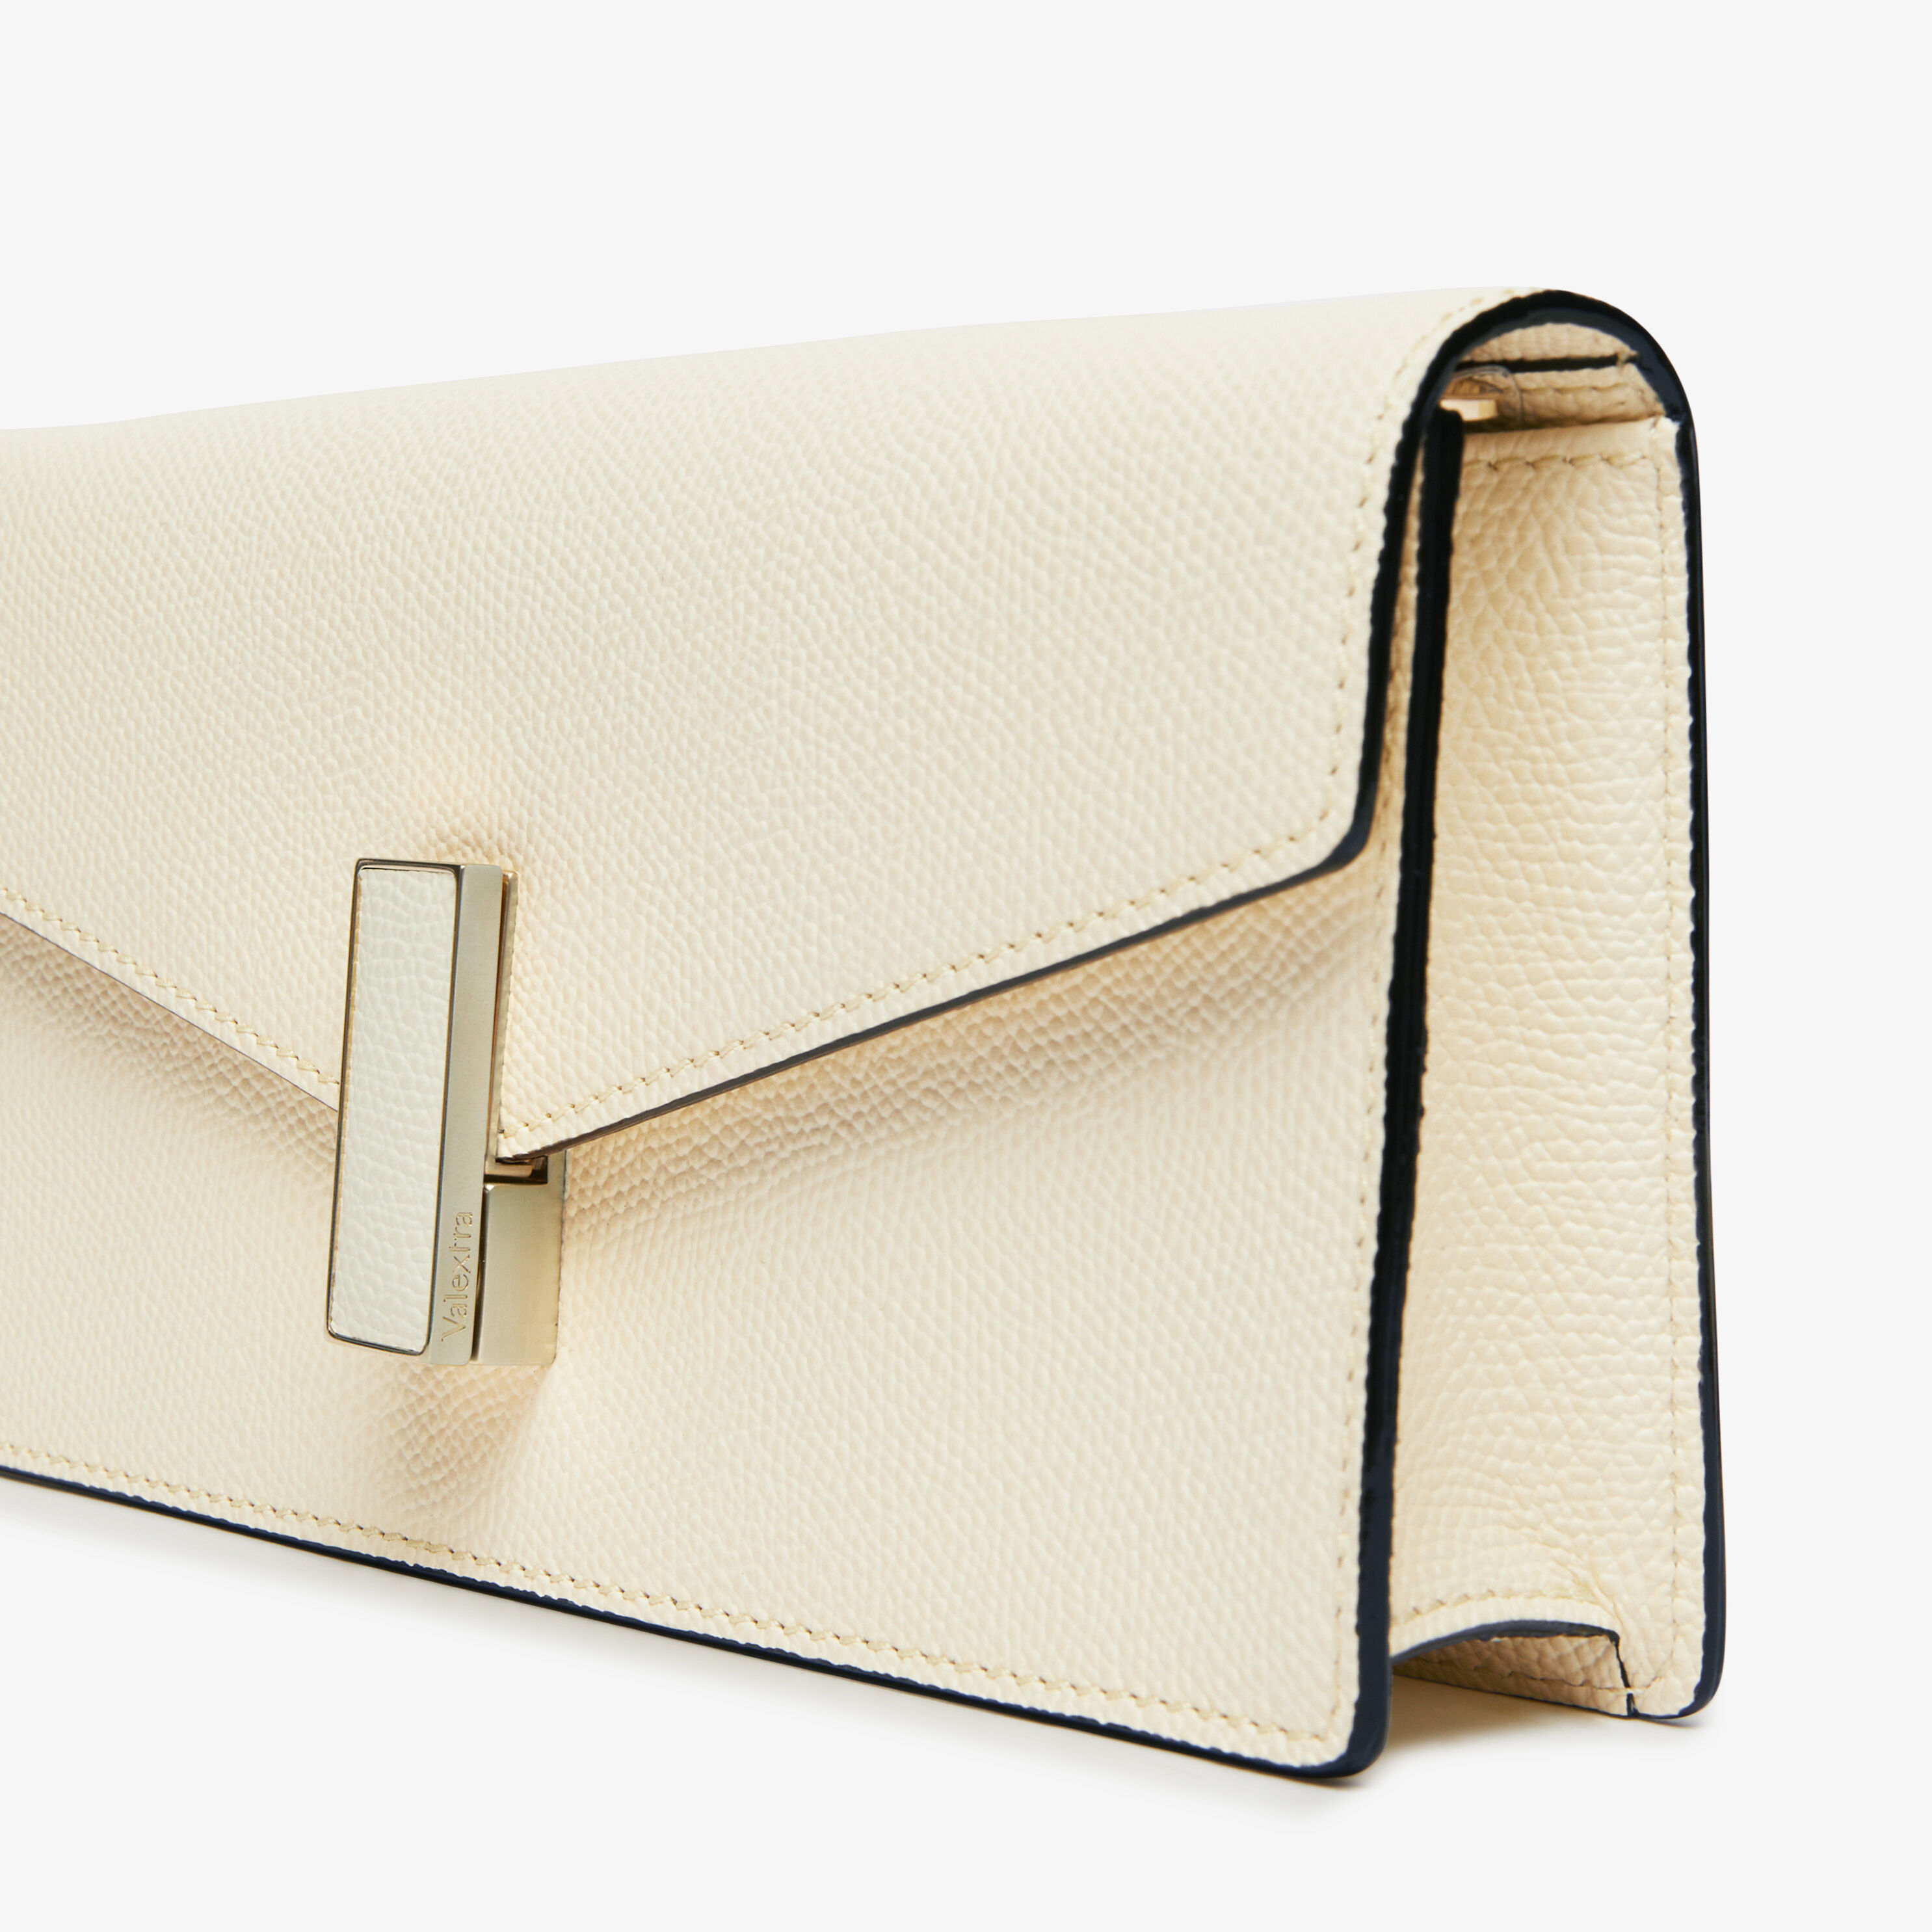 Valextra Iside leather clutch bag - White